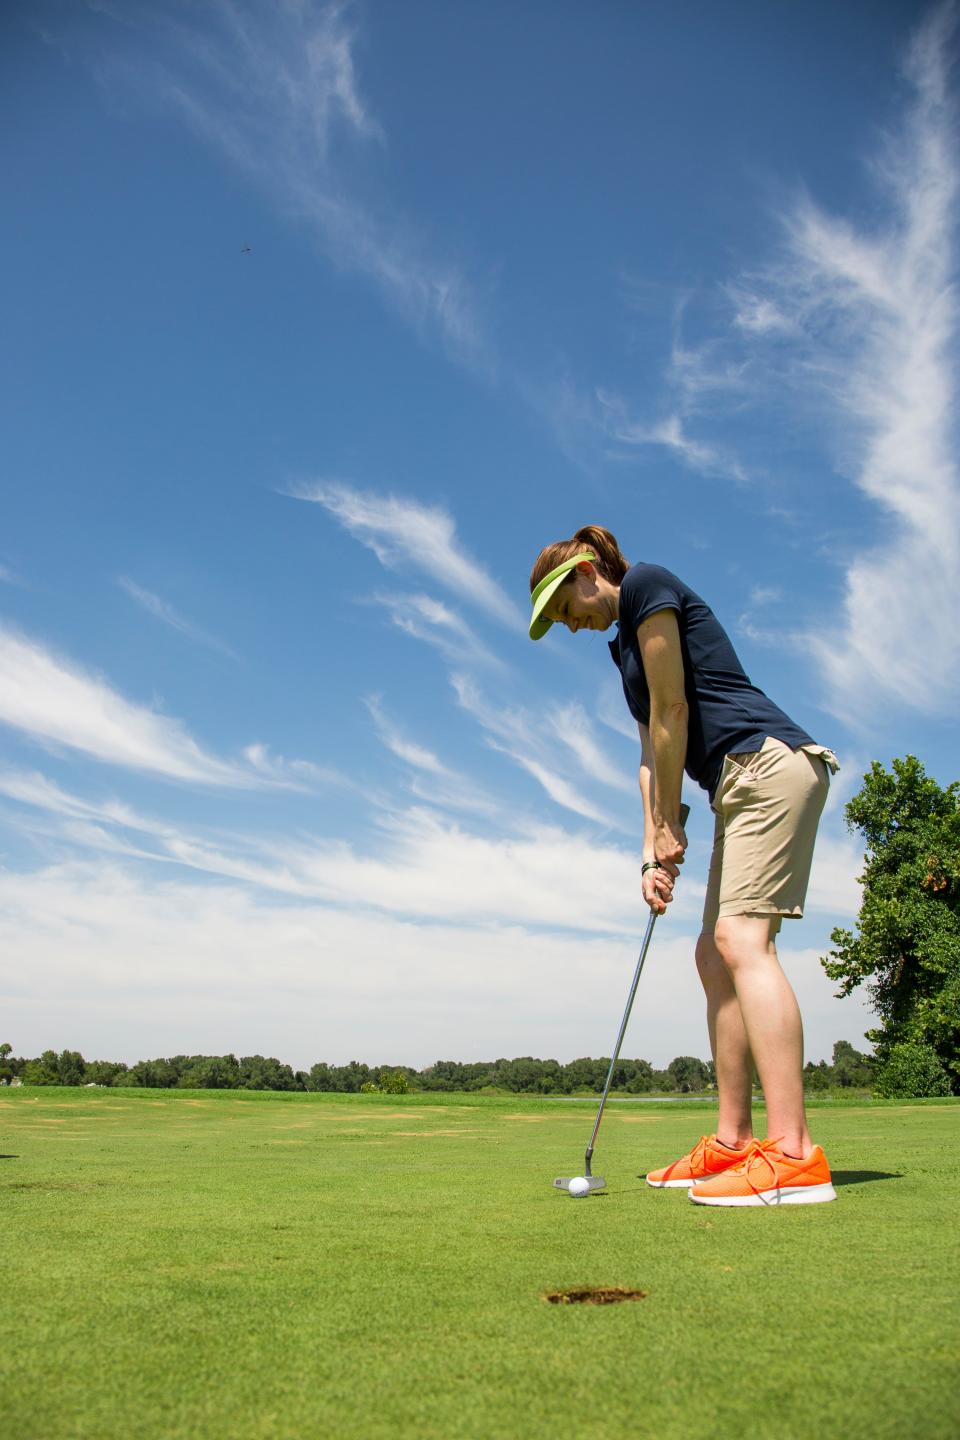 Golf Digest included Fort Cobb State Park Golf Course in its “Places to Stay” publication as a three-star course for three years in a row.